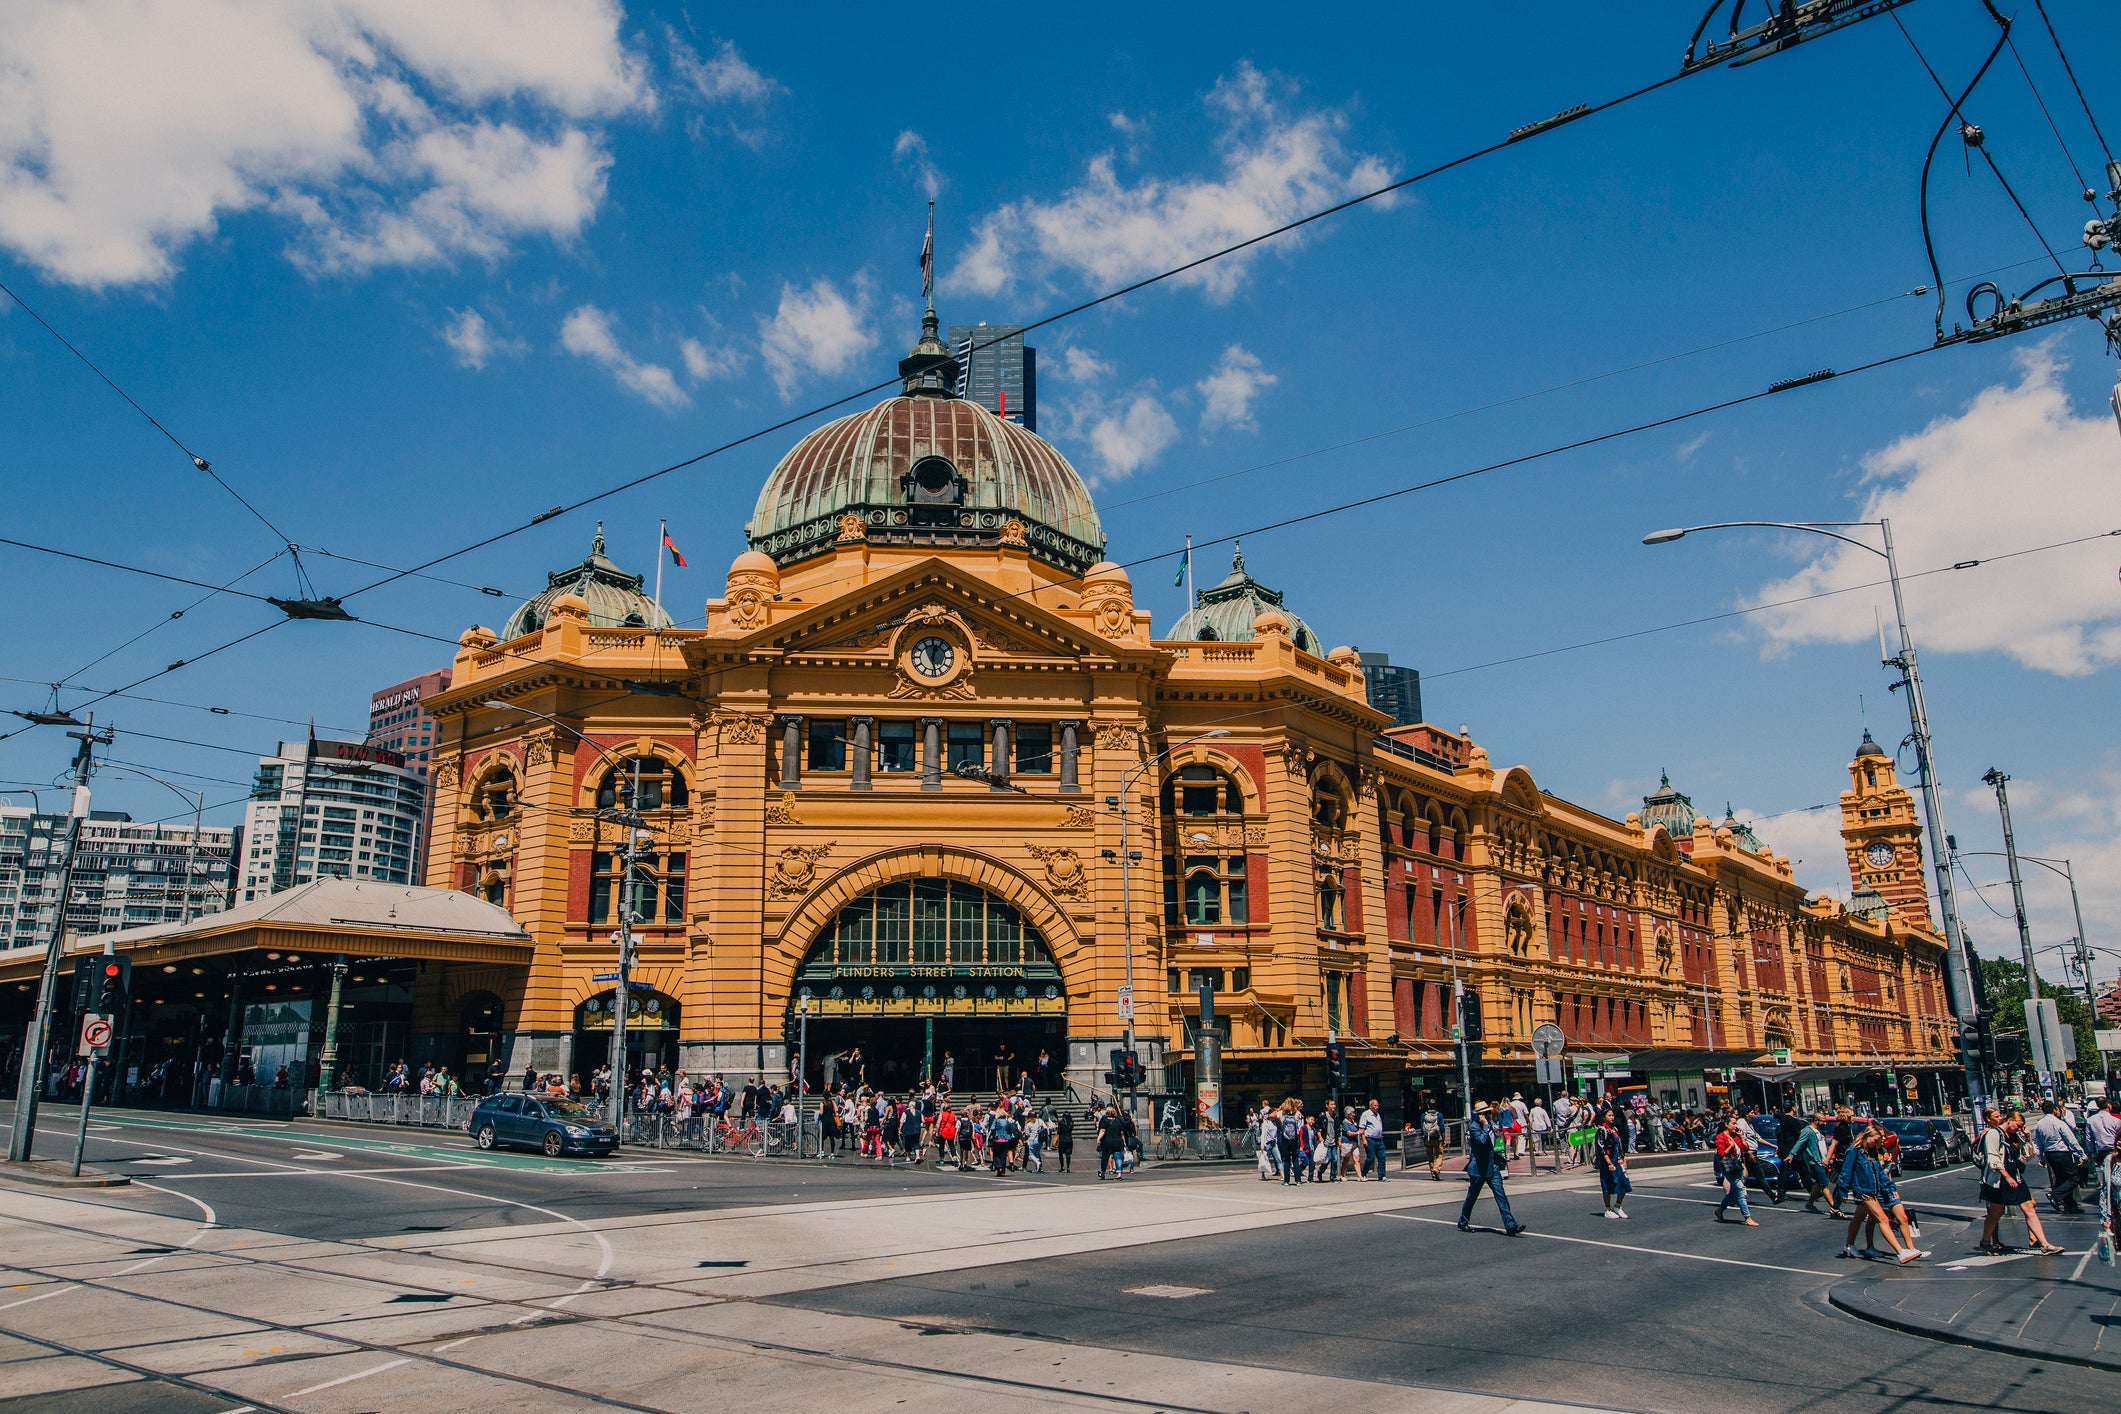 Flinders Street Station, one of the city’s most famous landmarks